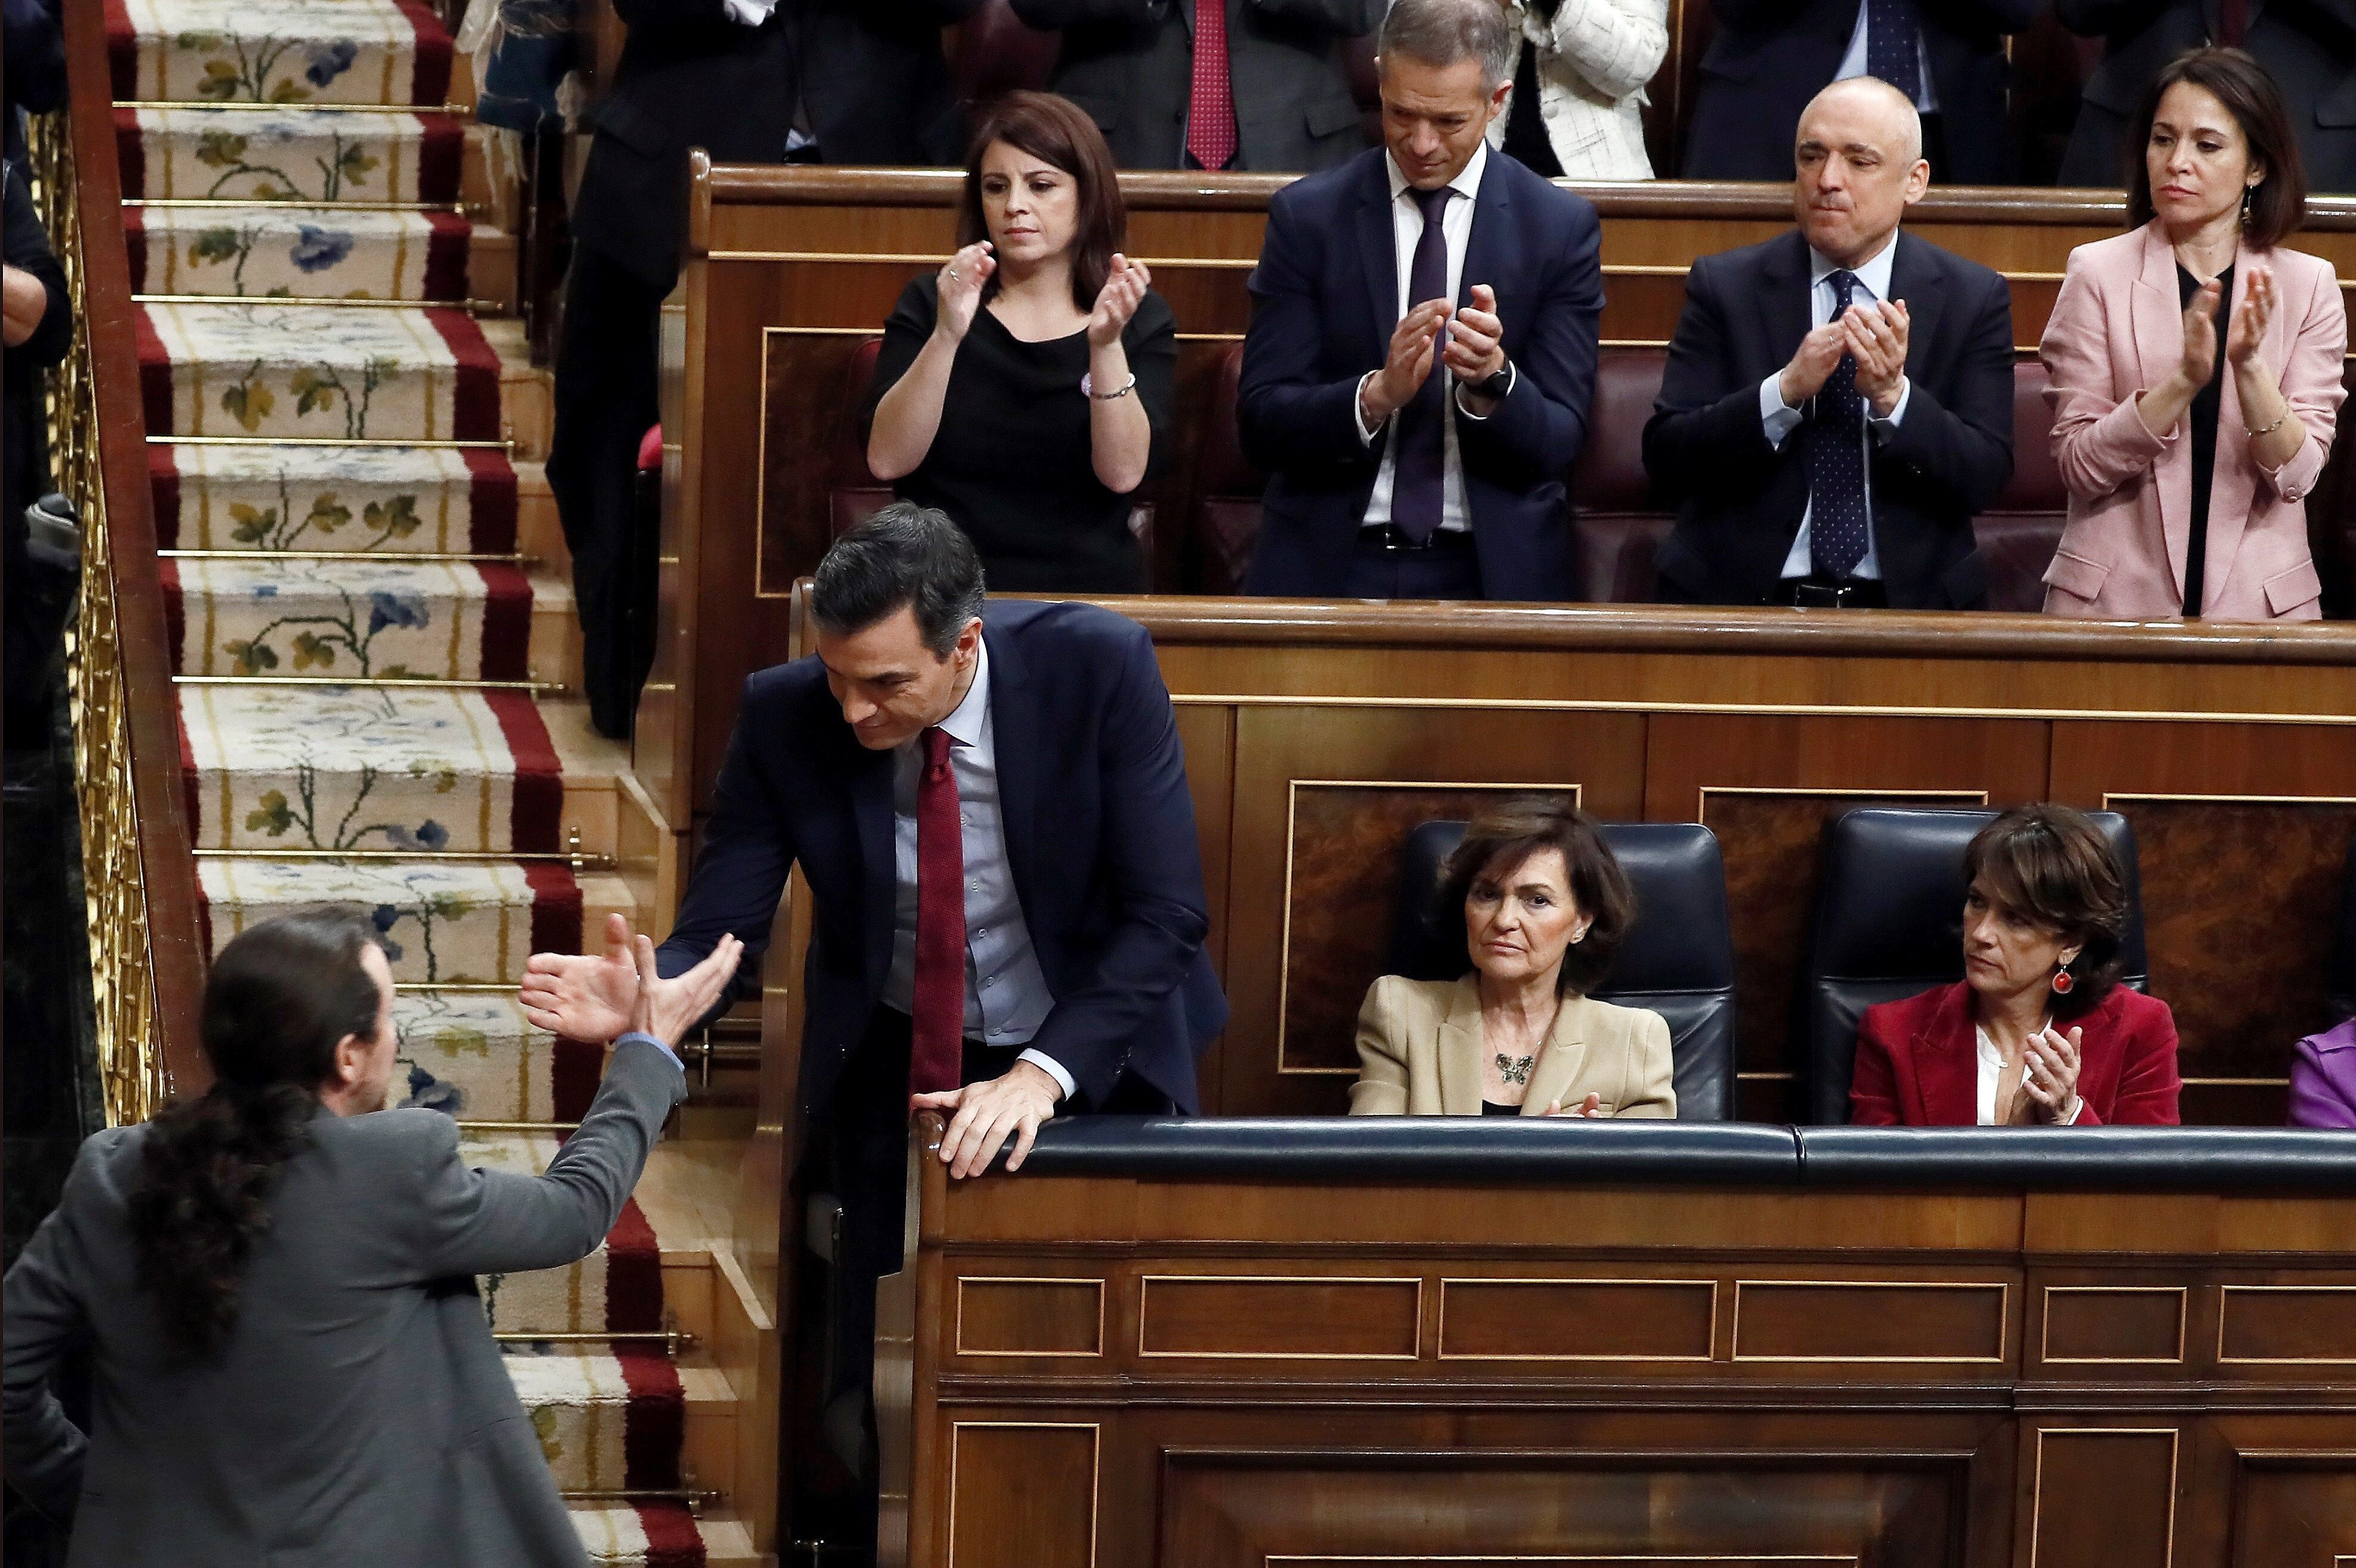 Pedro Sánchez returned as Spanish prime minister by two votes